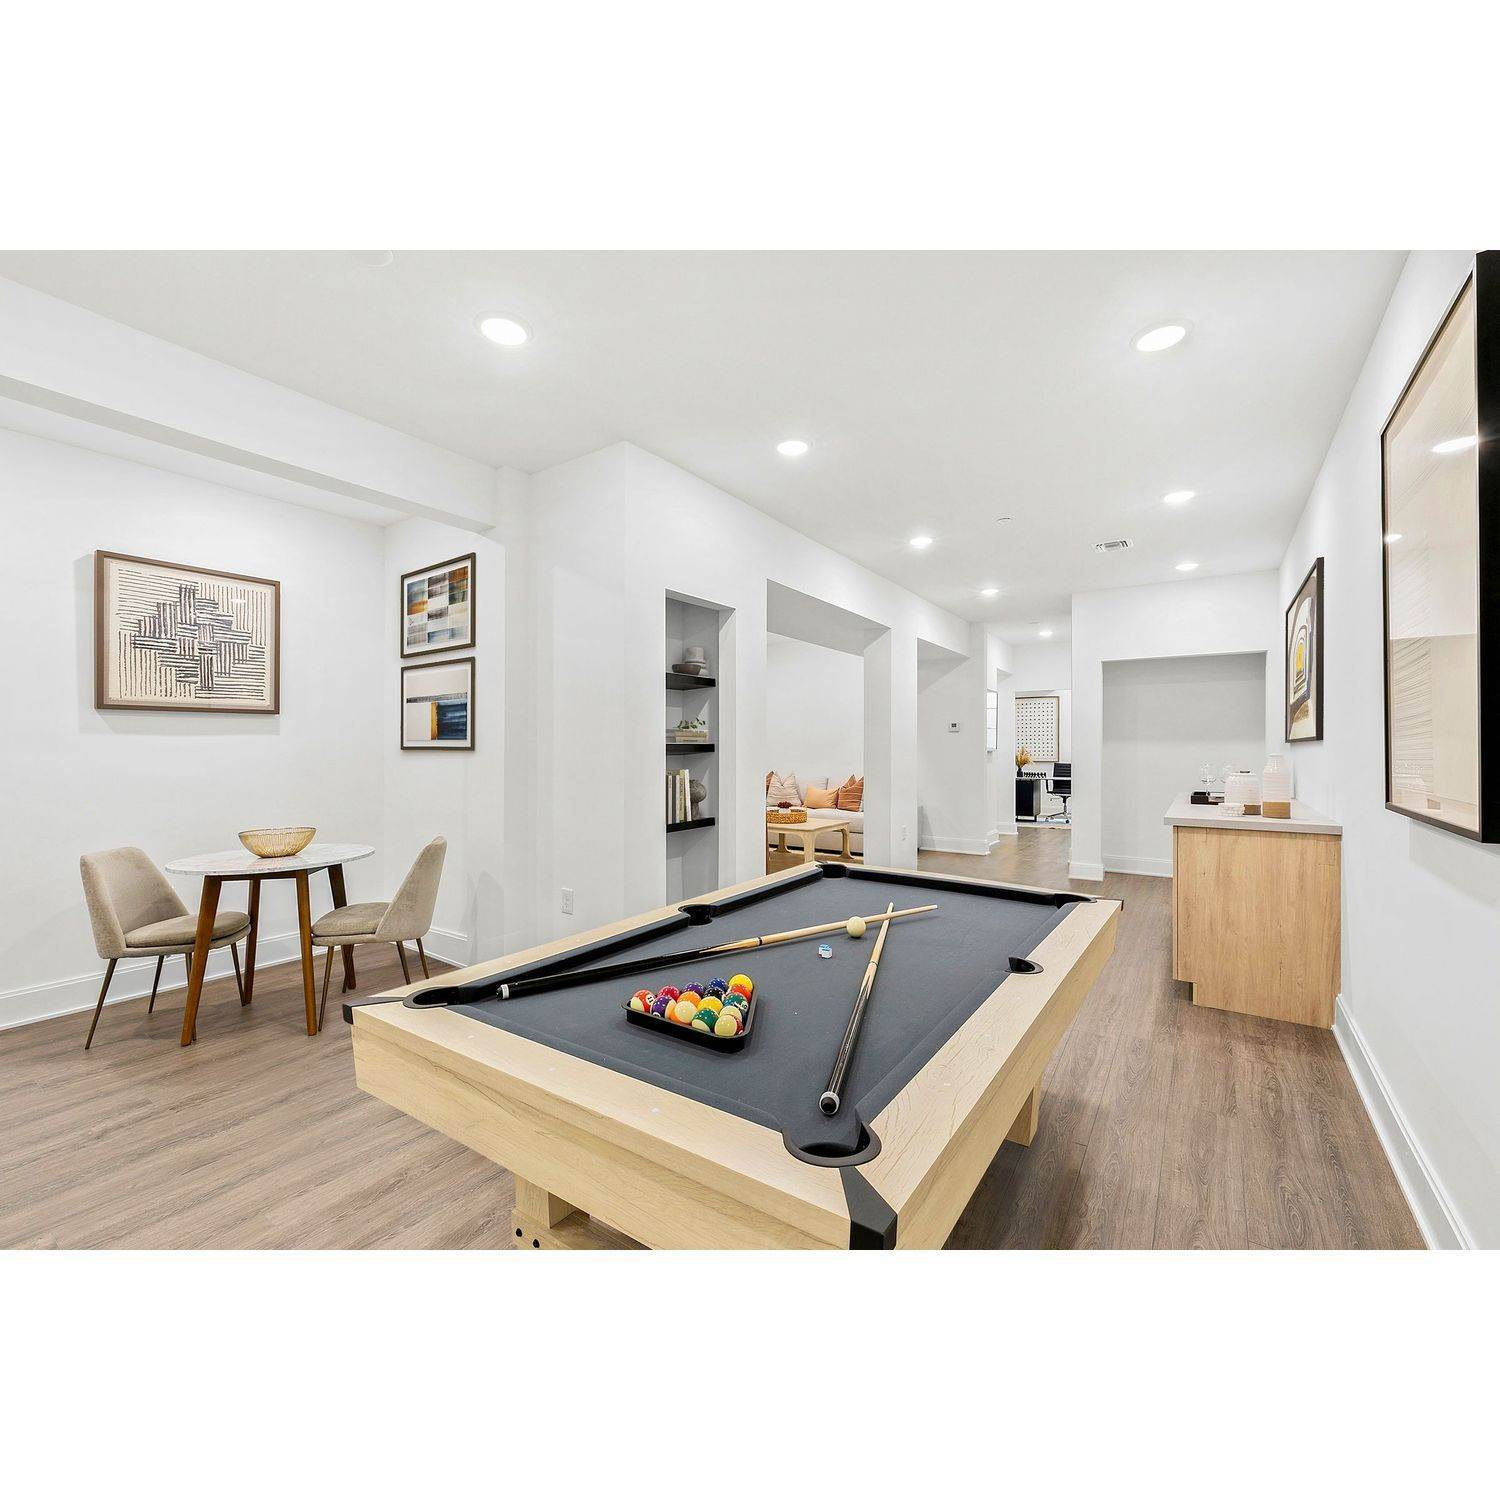 22. Meadowbrook Pointe East Meadow xây dựng tại 123 Merrick Avenue, East Meadow, NY 11554